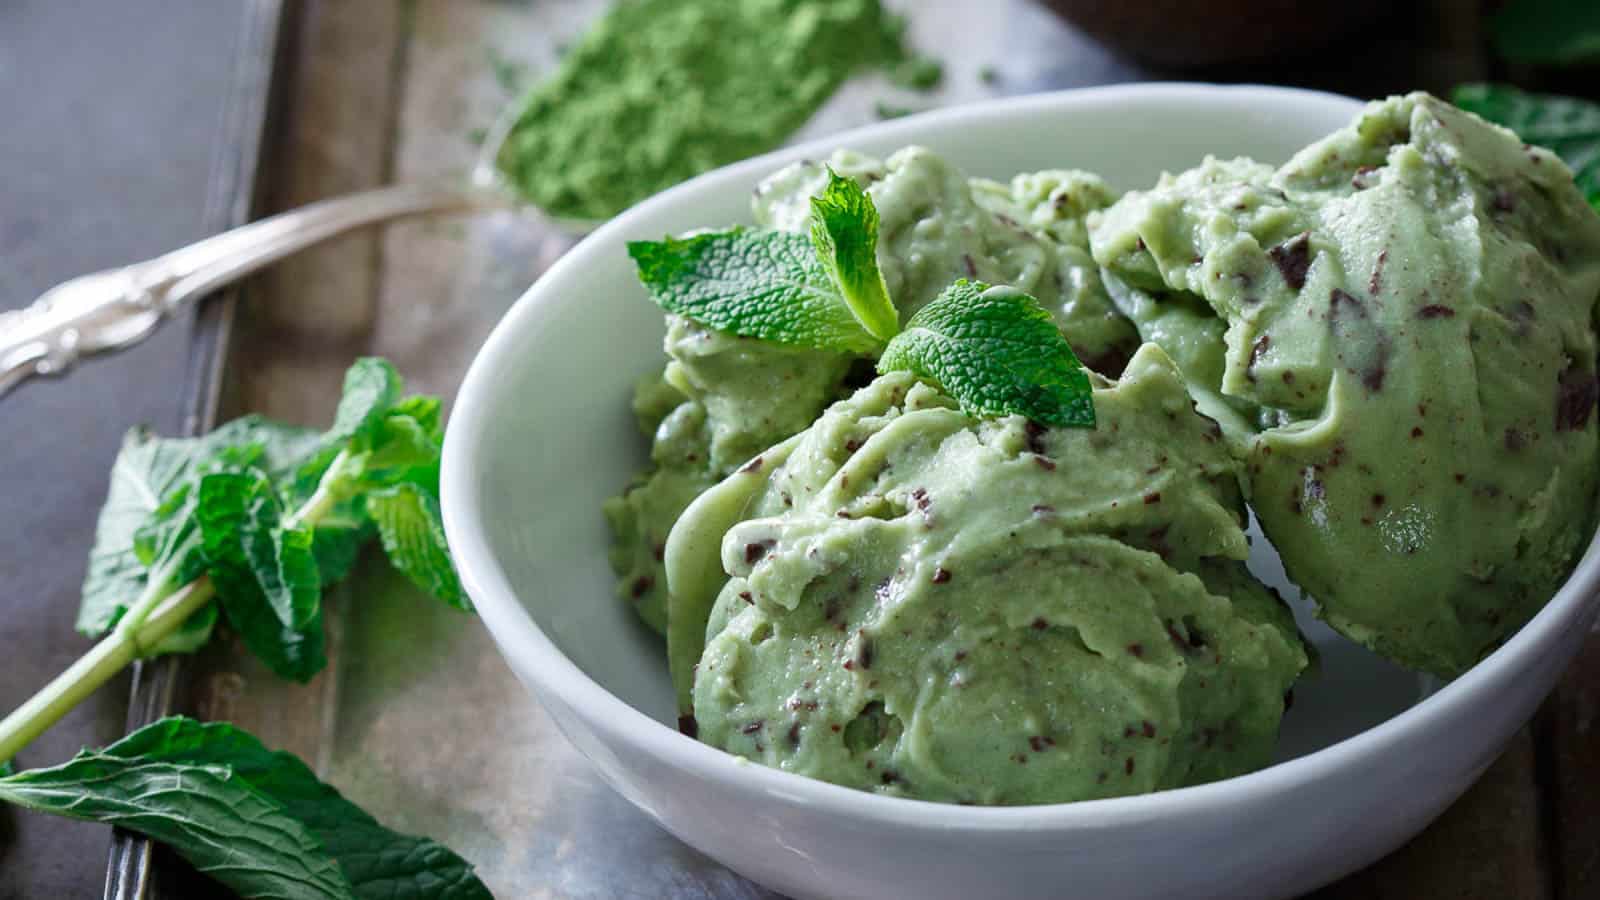 Matcha mint chocolate chip ice cream in a bowl with mint leaves and matcha.